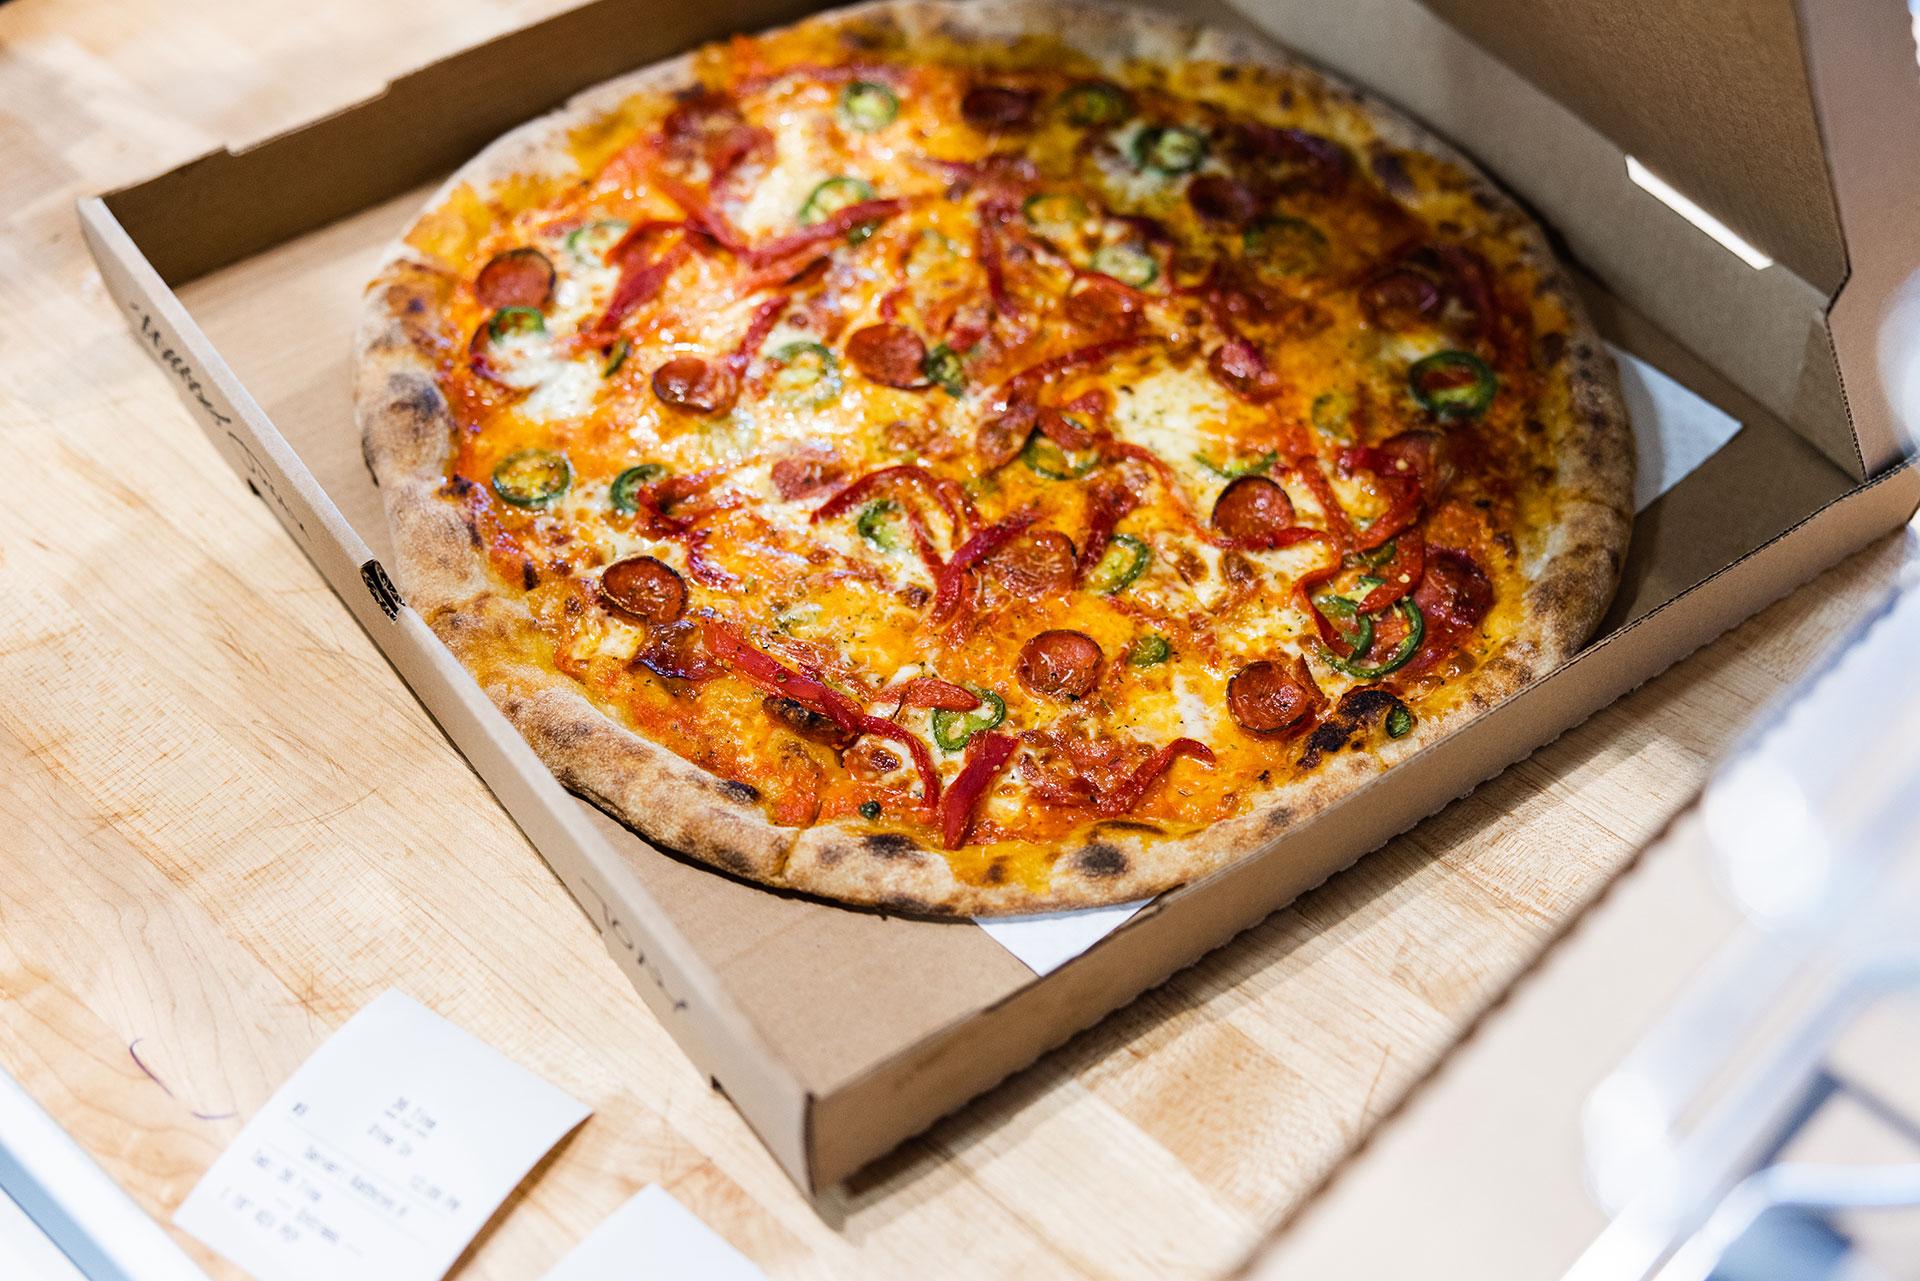 a freshly-made pizza thief pizza ready ready for delivery in a pizza box with the lid open